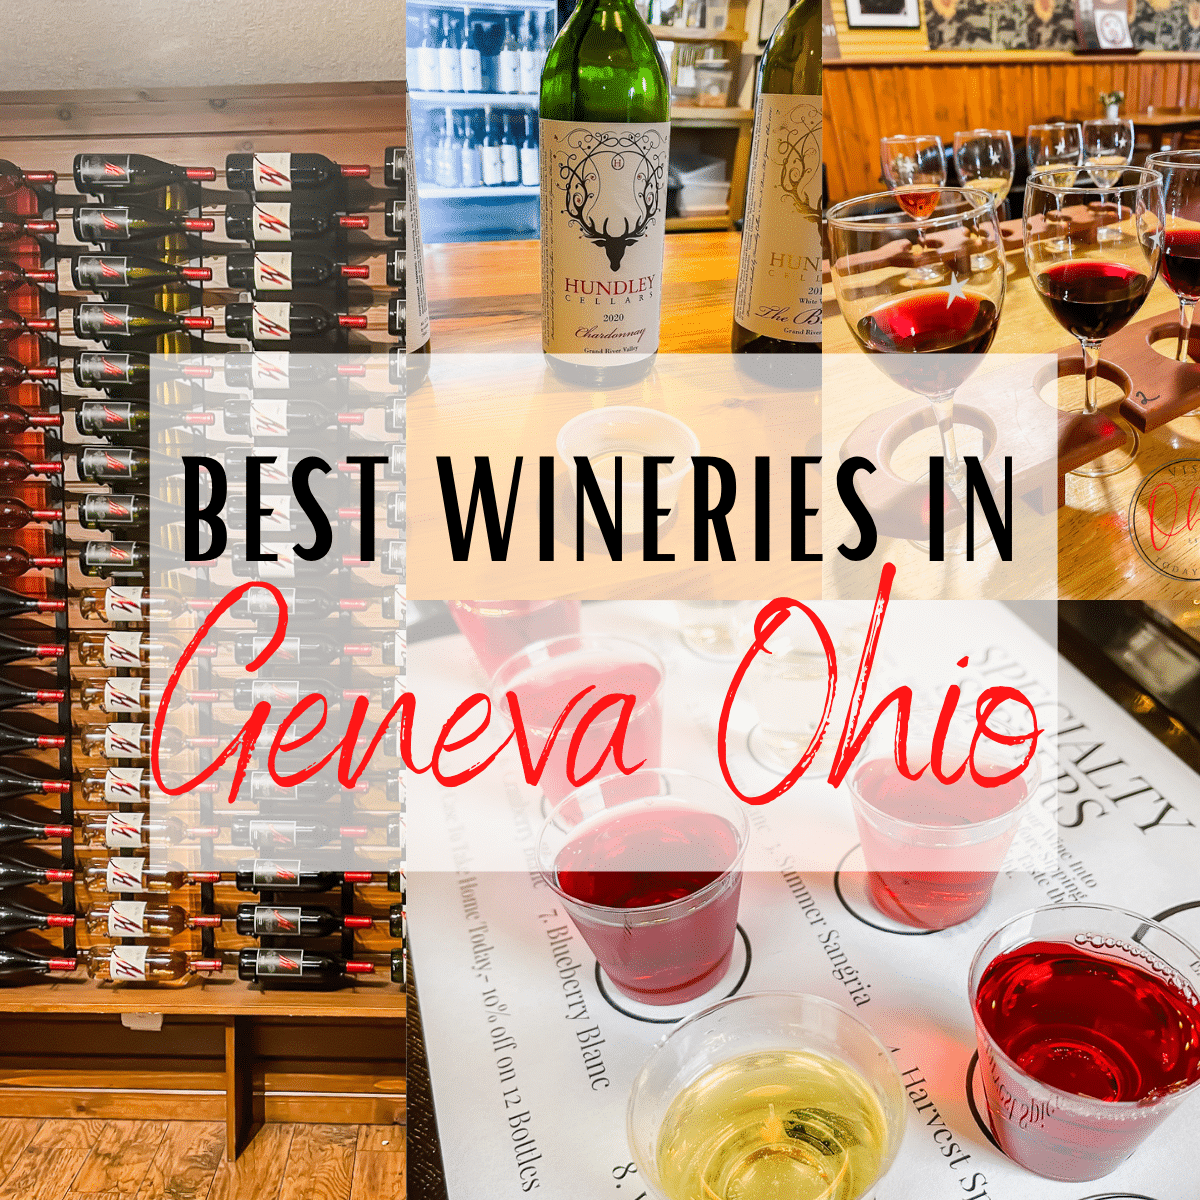 There are over 20+ wineries in Geneva Ohio. Plan a weekend of fun, food and great wine at the wineries in Geneva Ohio! #ohiowine #ohiowineries #genevaohio